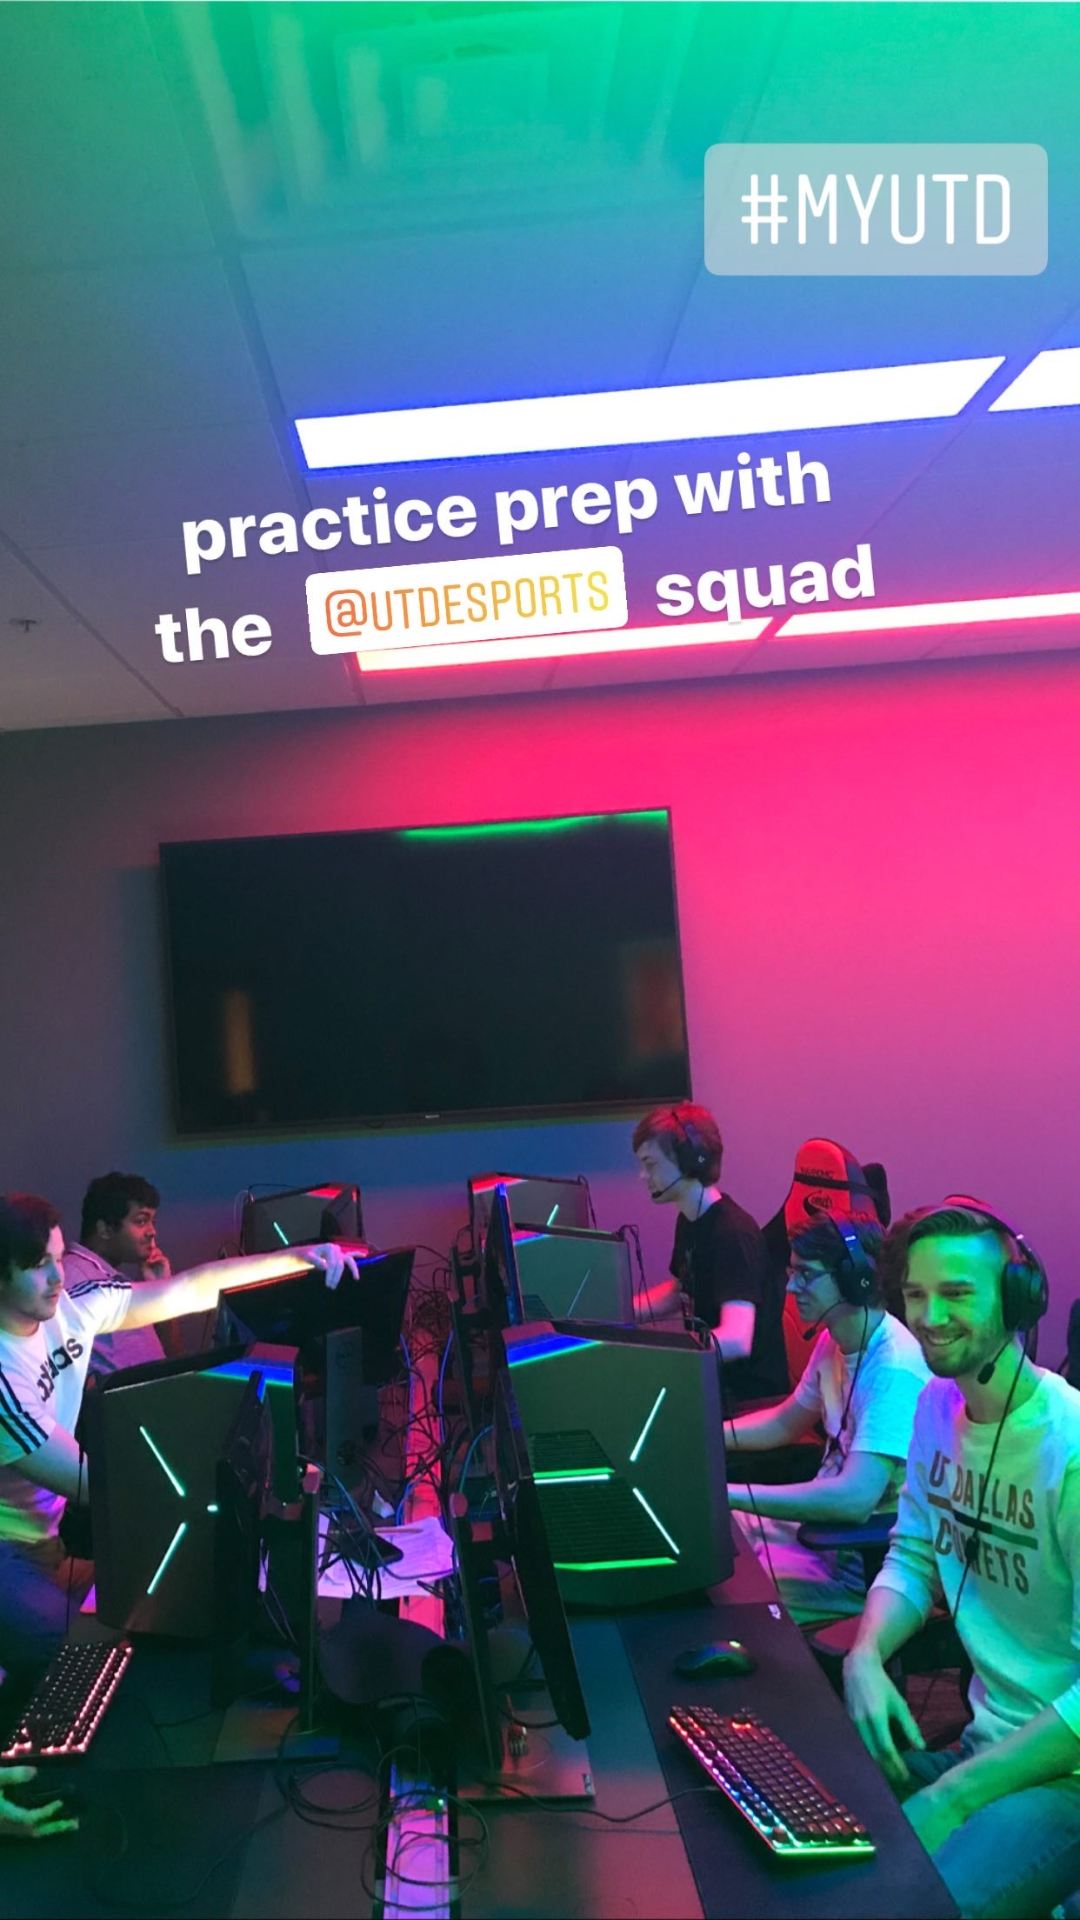  Pictured, five members of esports team seated at computers.